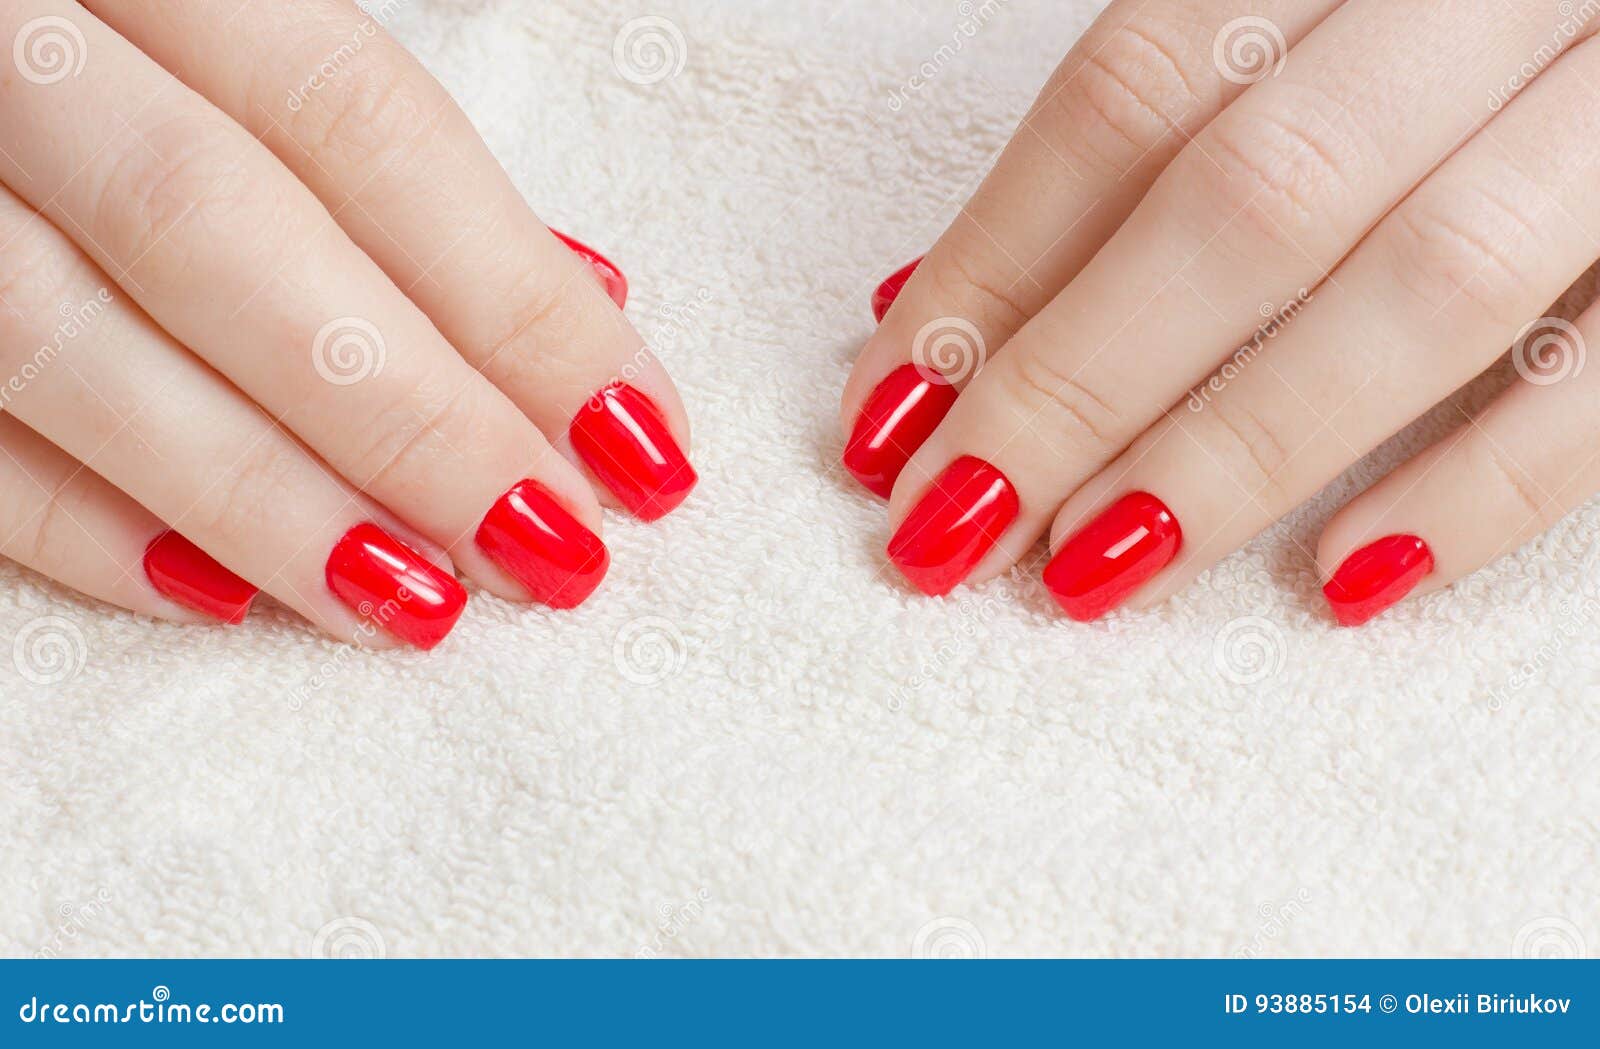 manicure - beauty treatment photo of nice manicured woman fingernails with red nail polish.